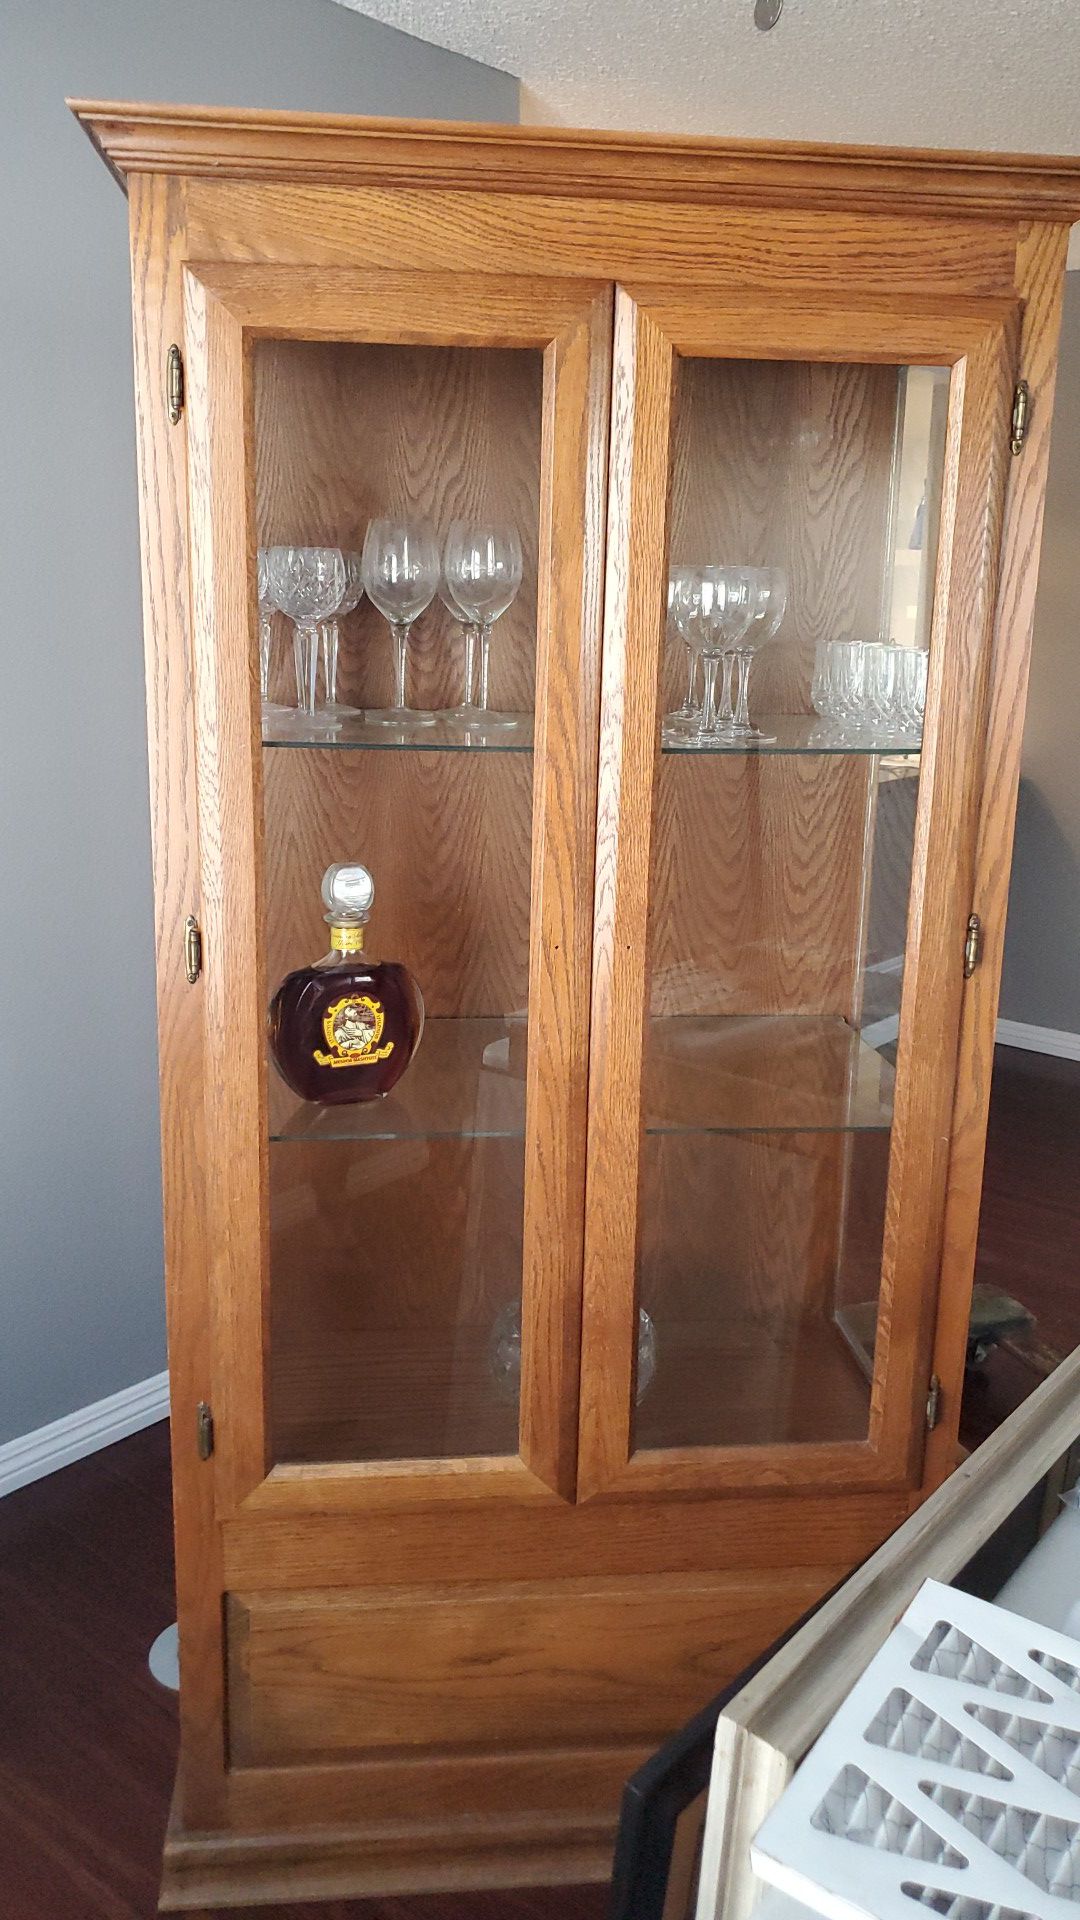 Curio cabinet and Lazy boy free to good home